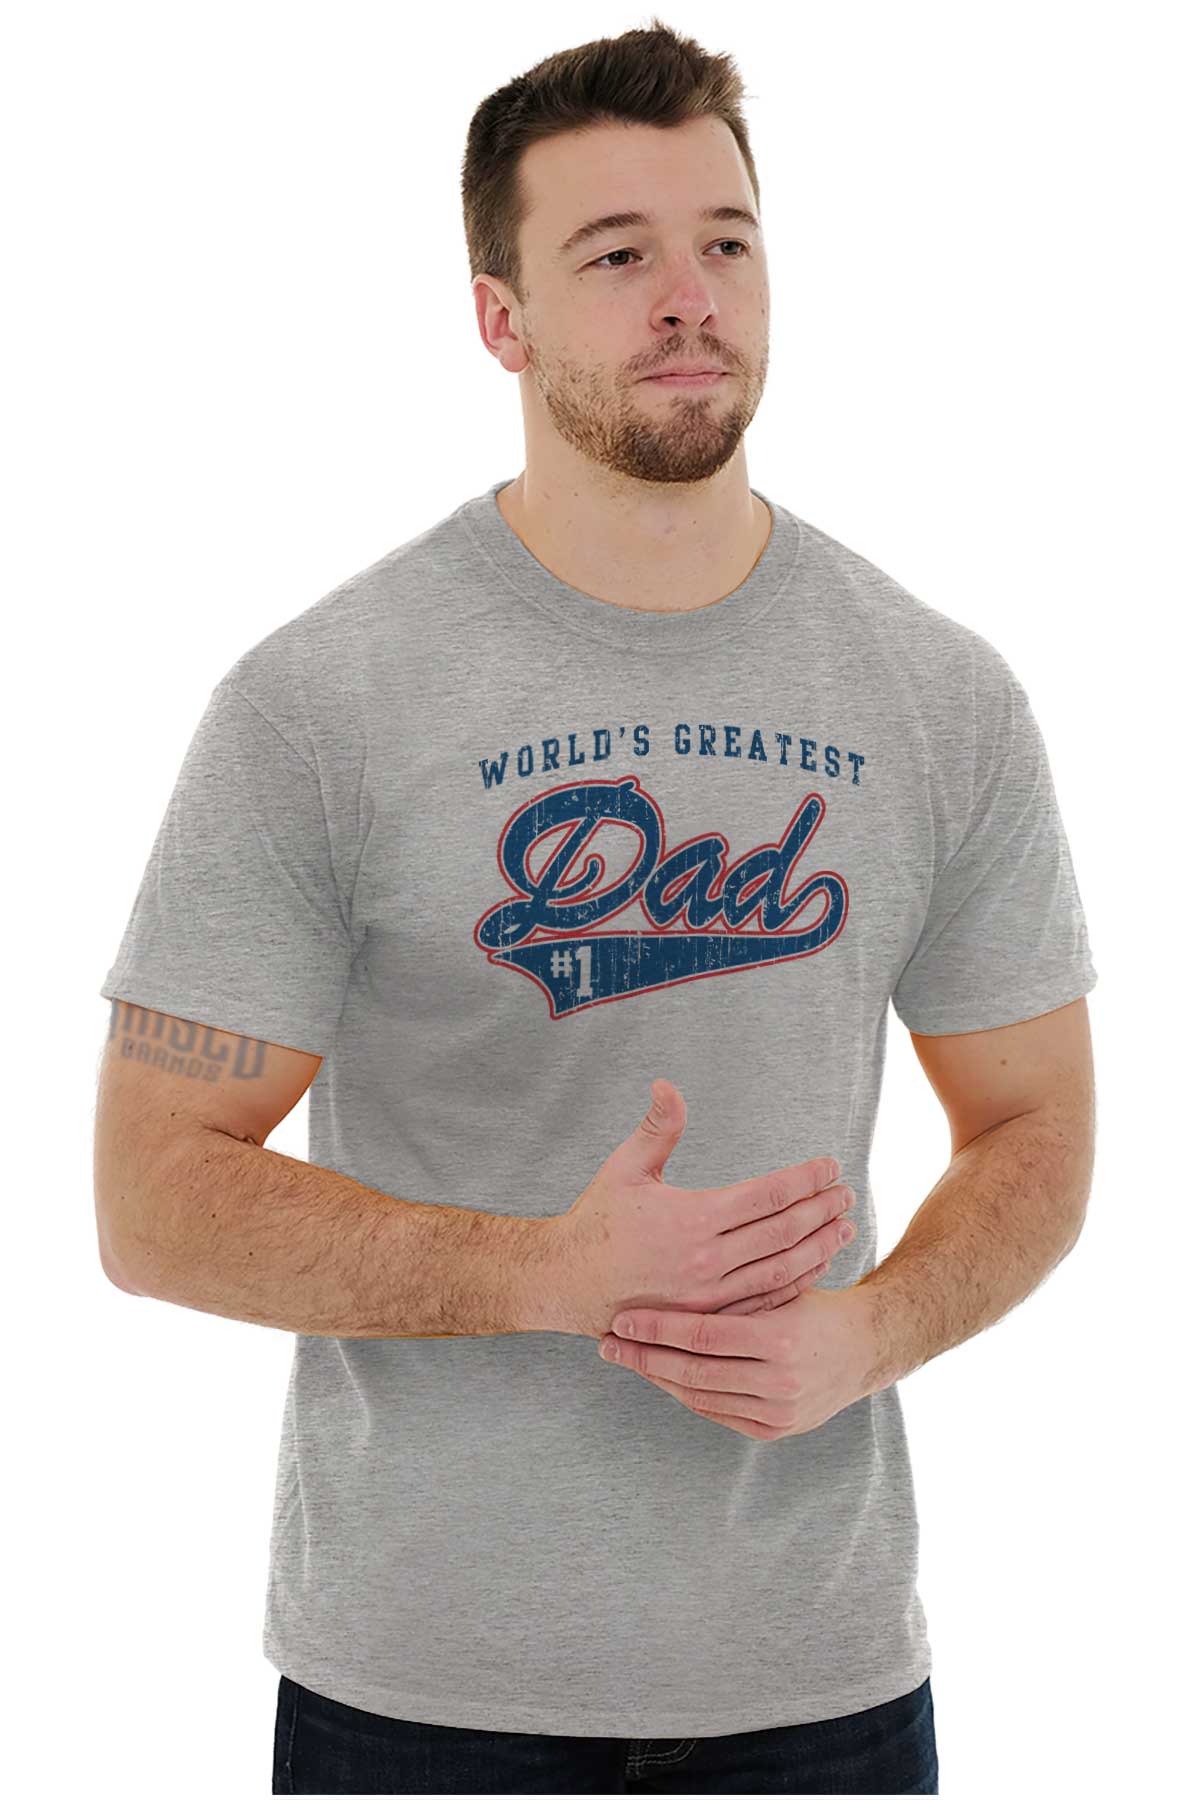 World's Greatest Dad Number 1 Father Men's Graphic T Shirt Tees Brisco Brands S - image 5 of 5